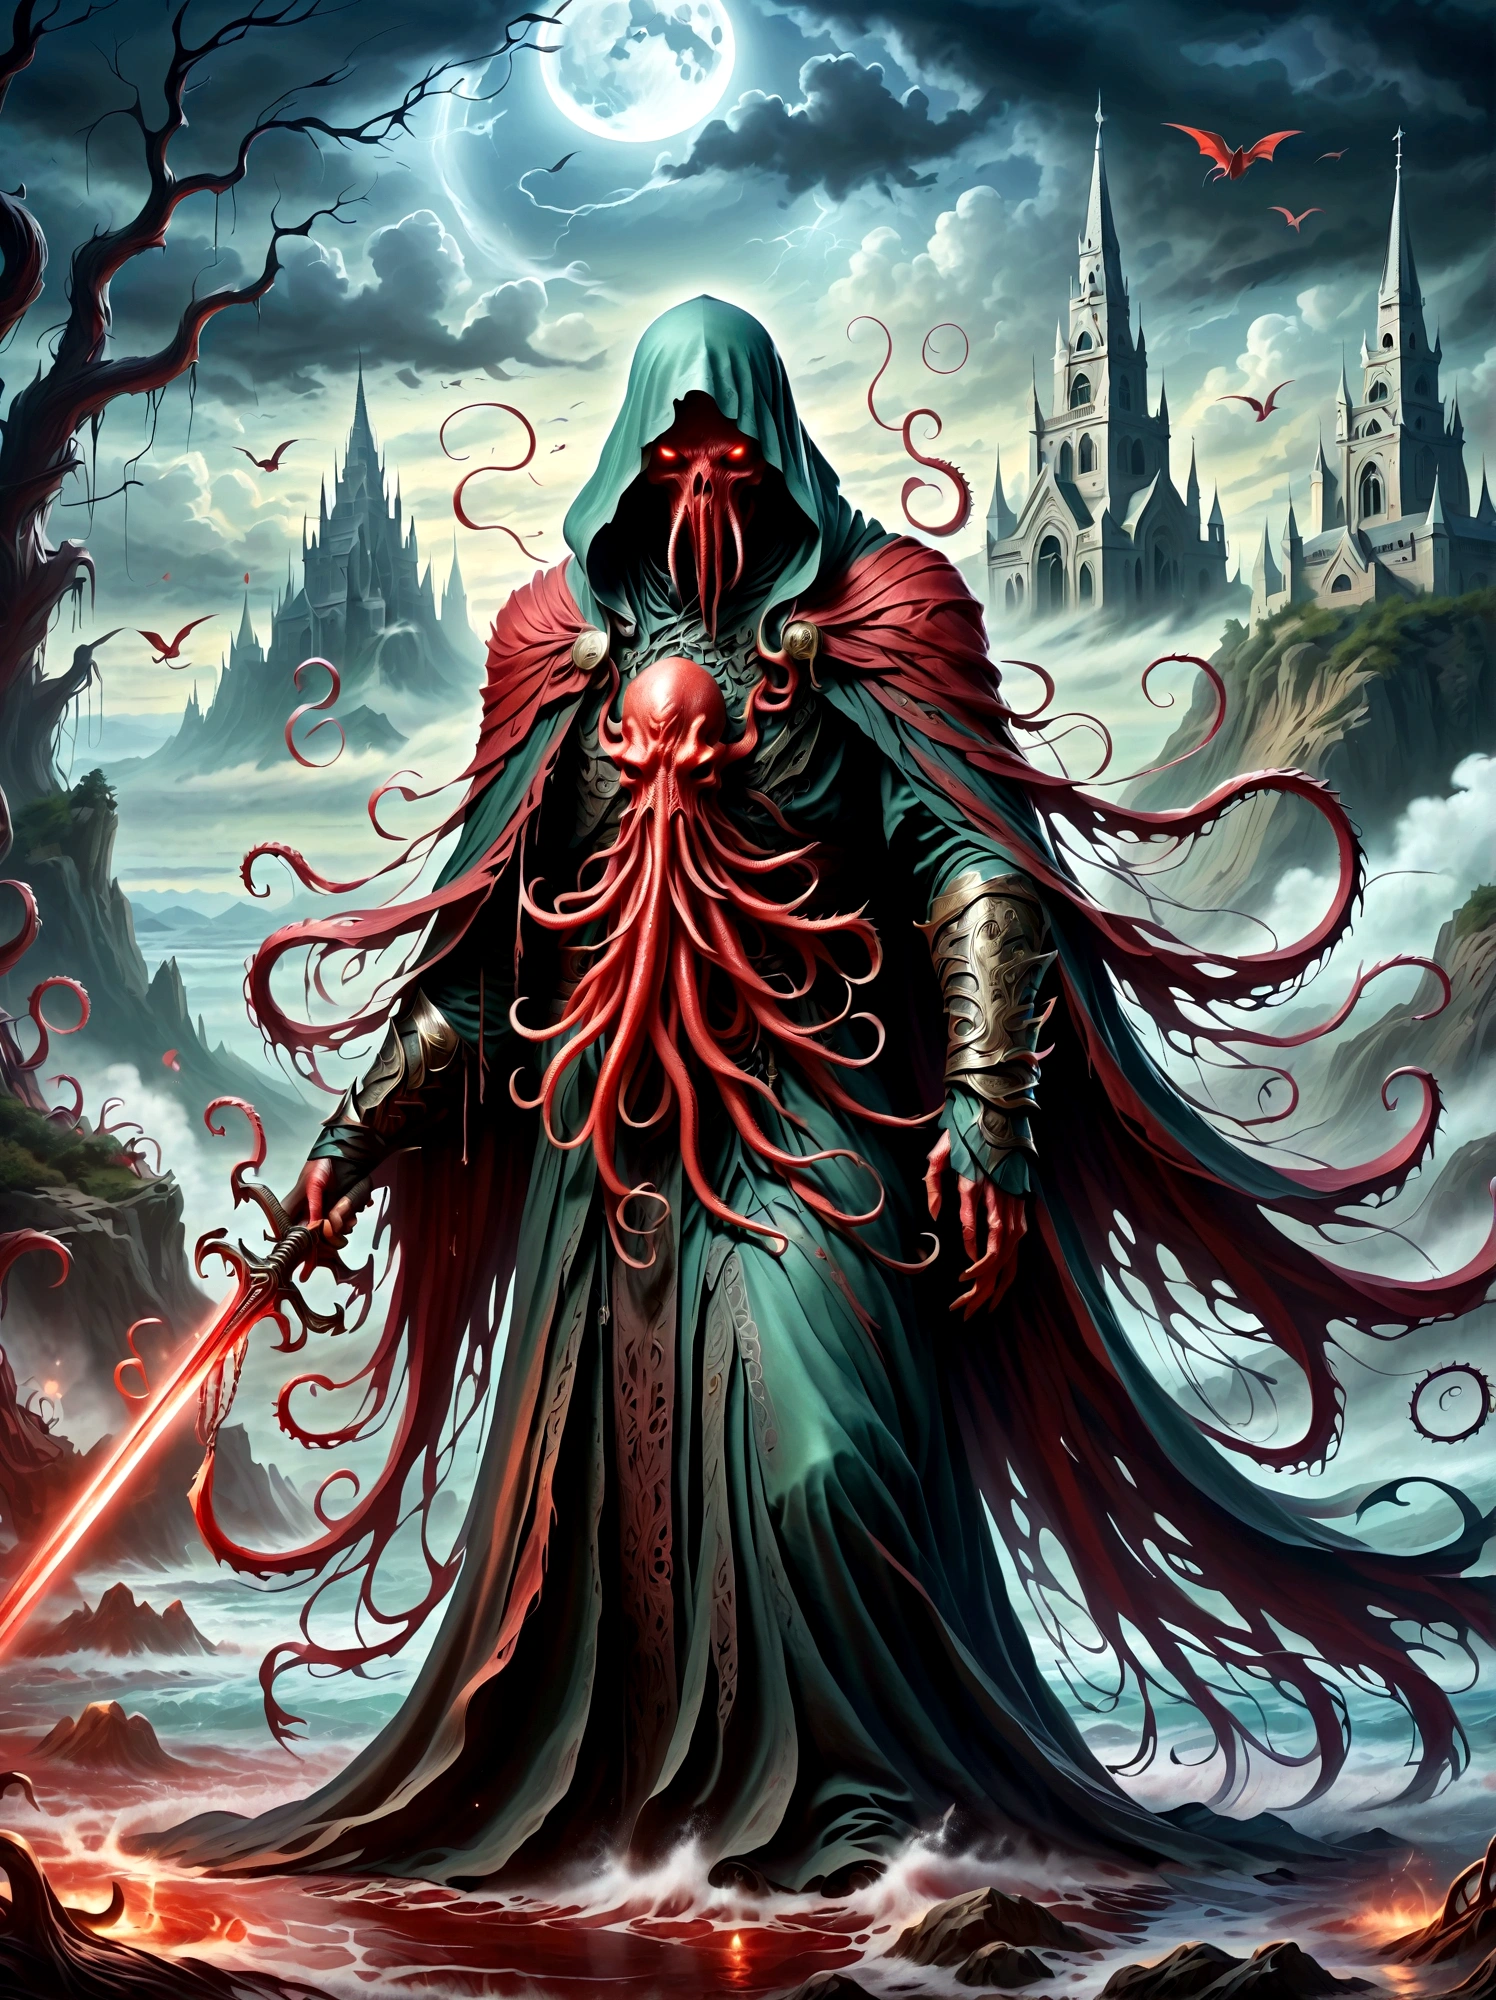 Bloody Cthulhu is extremely scary and weird，Cthulhu with sword，Mysterious Manzhu Shahua，bright门口盛开的血色鬼花，Blood-red tentacles guide the souls of the past，charm，Flirtatious，Strange，Gothic style，bright，Fantastic Creatures，Devilish scenery，Unforgettable environment，bright般的气氛，Wonderful lighting，Vibrant colors，Surrealism，Distorted anatomy，Nightmare Creatures，Glowing eyes，Strange shapes